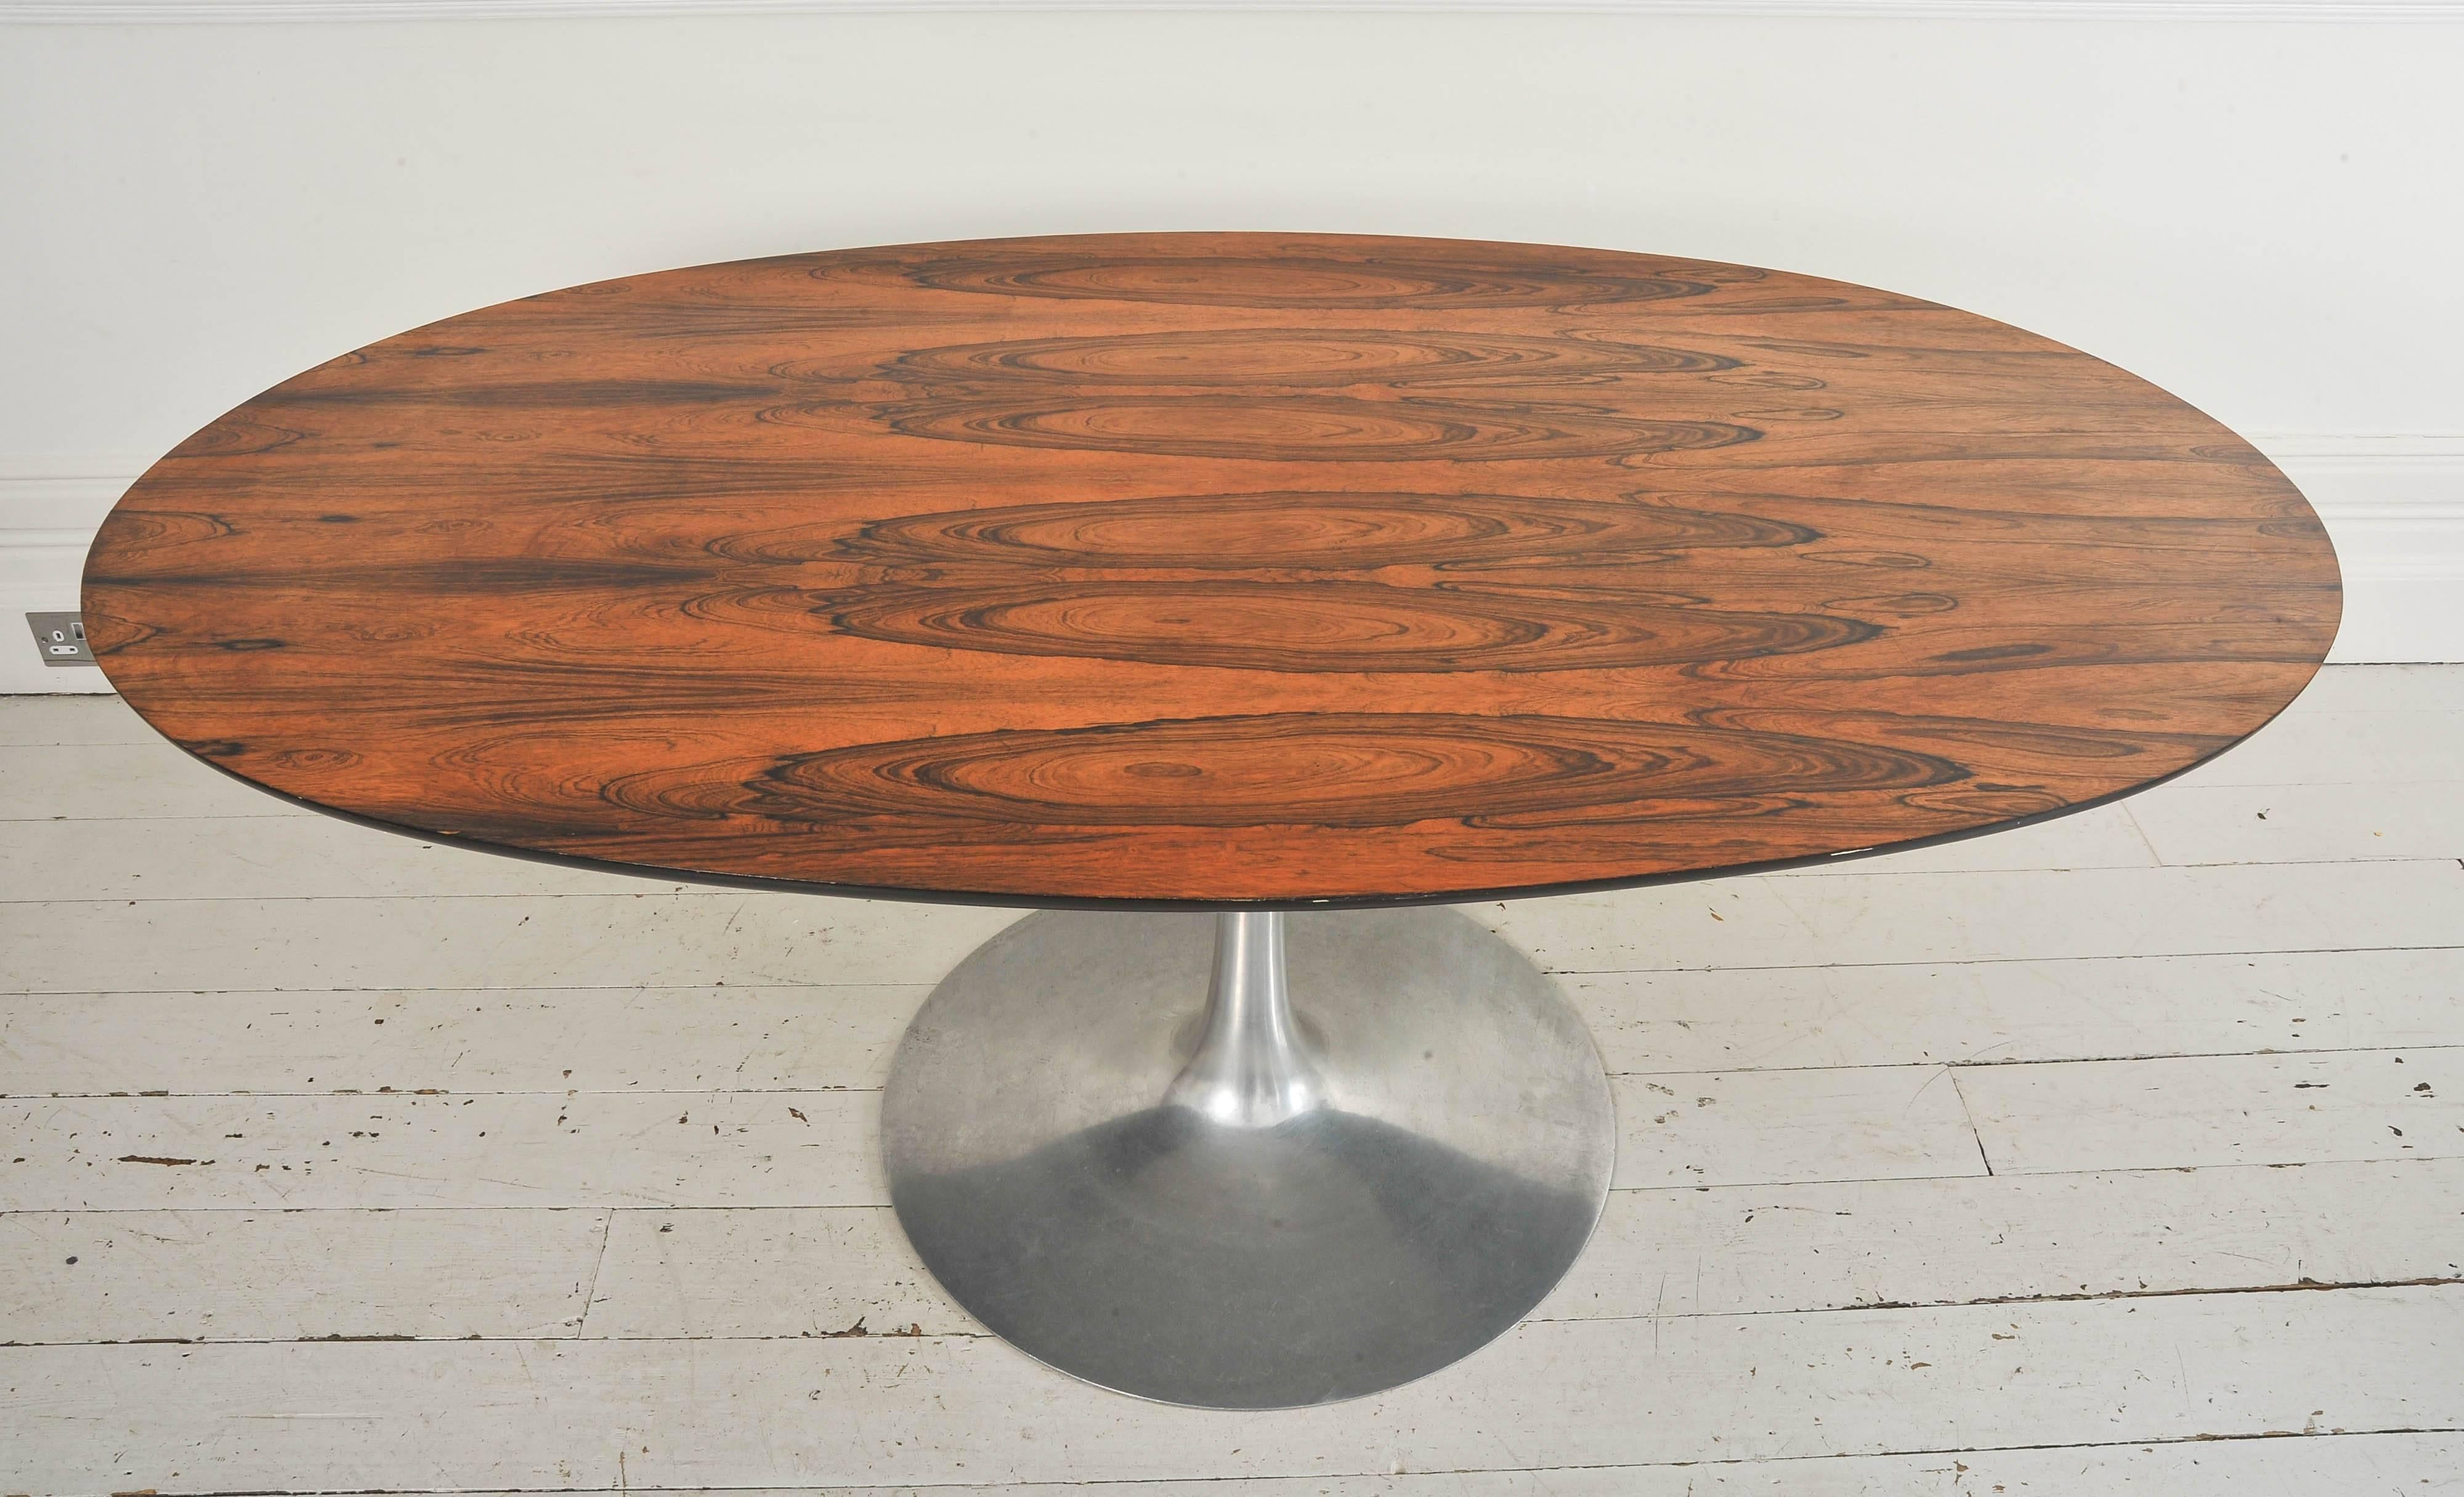 This is a really magnificent piece of design by Maurice Burke for Arkana. The rosewood top has wonderful patina and marries beautifully with the sleek brushed aluminium base.

We are happy to ship this item to you for an additional cost. Please